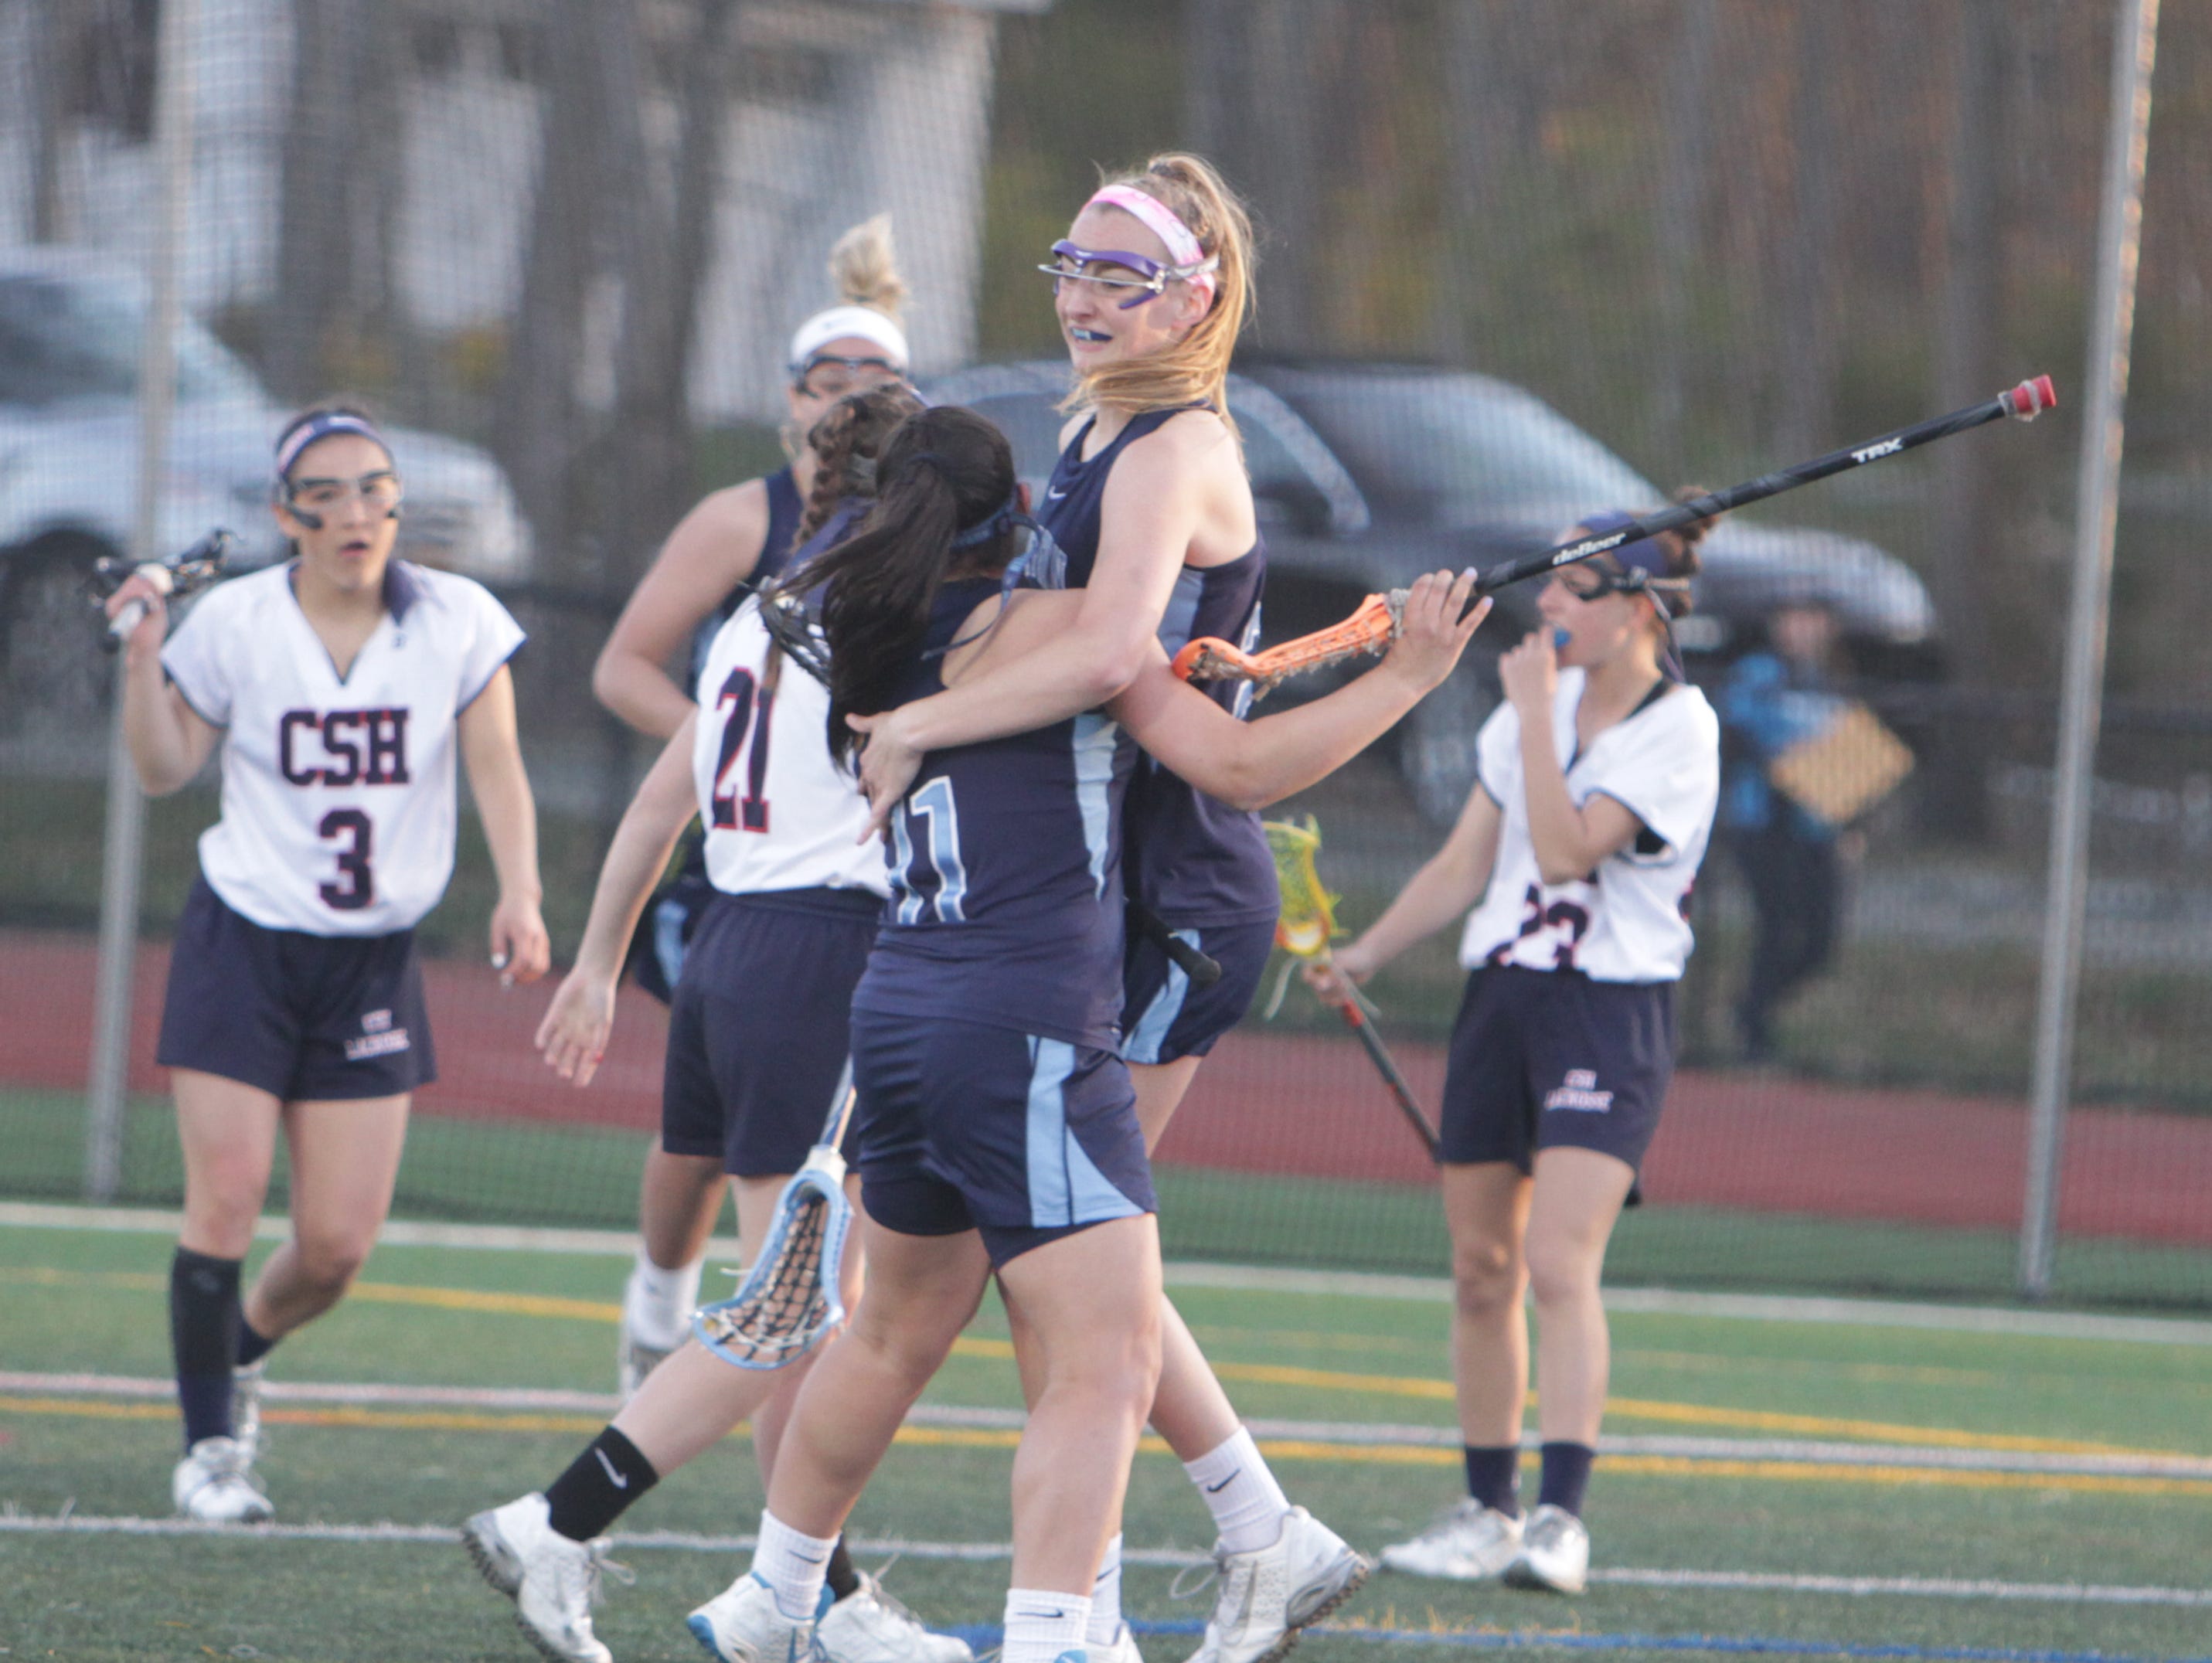 Action during a girls lacrosse game between Suffern and Cold Spring Harbor in the Gains for Brains Lax Showcase at Cold Spring Harbor High School on Saturday, April 16th, 2016. Cold Spring Harbor won 13-11.